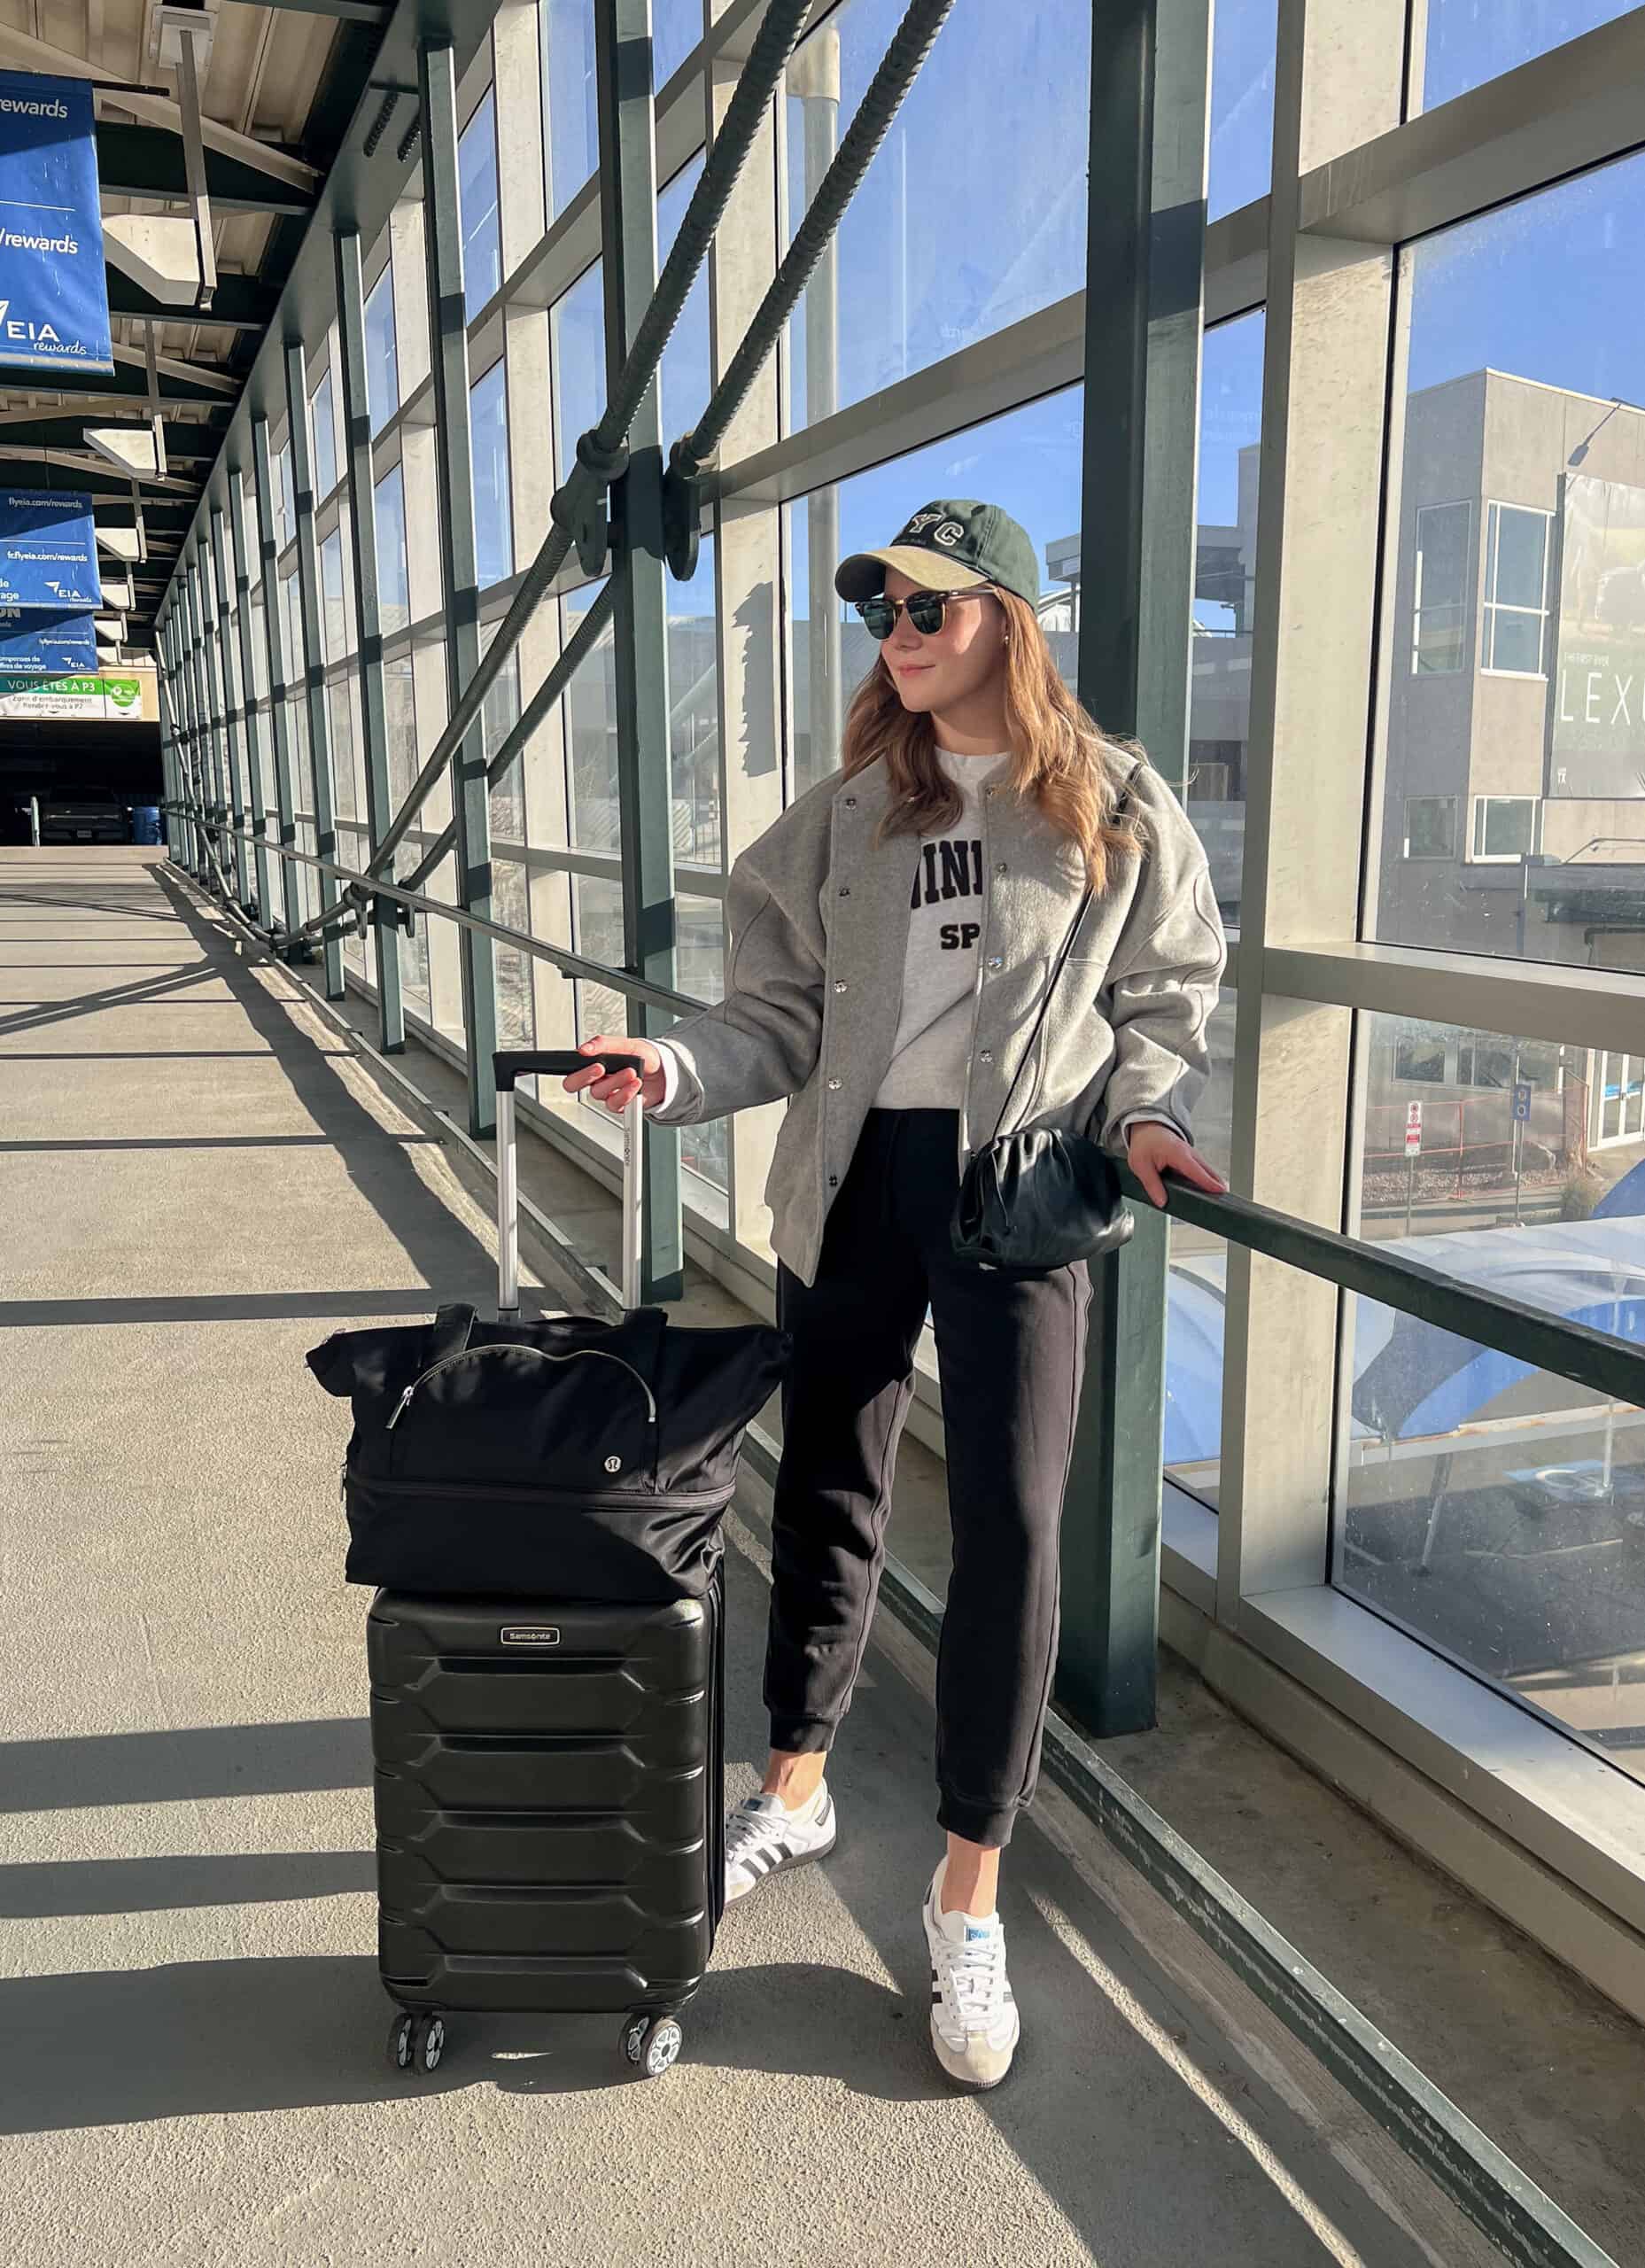 Christal wearing black joggers, a grey sweatshirt, a grey shacket and sneakers at the airport.